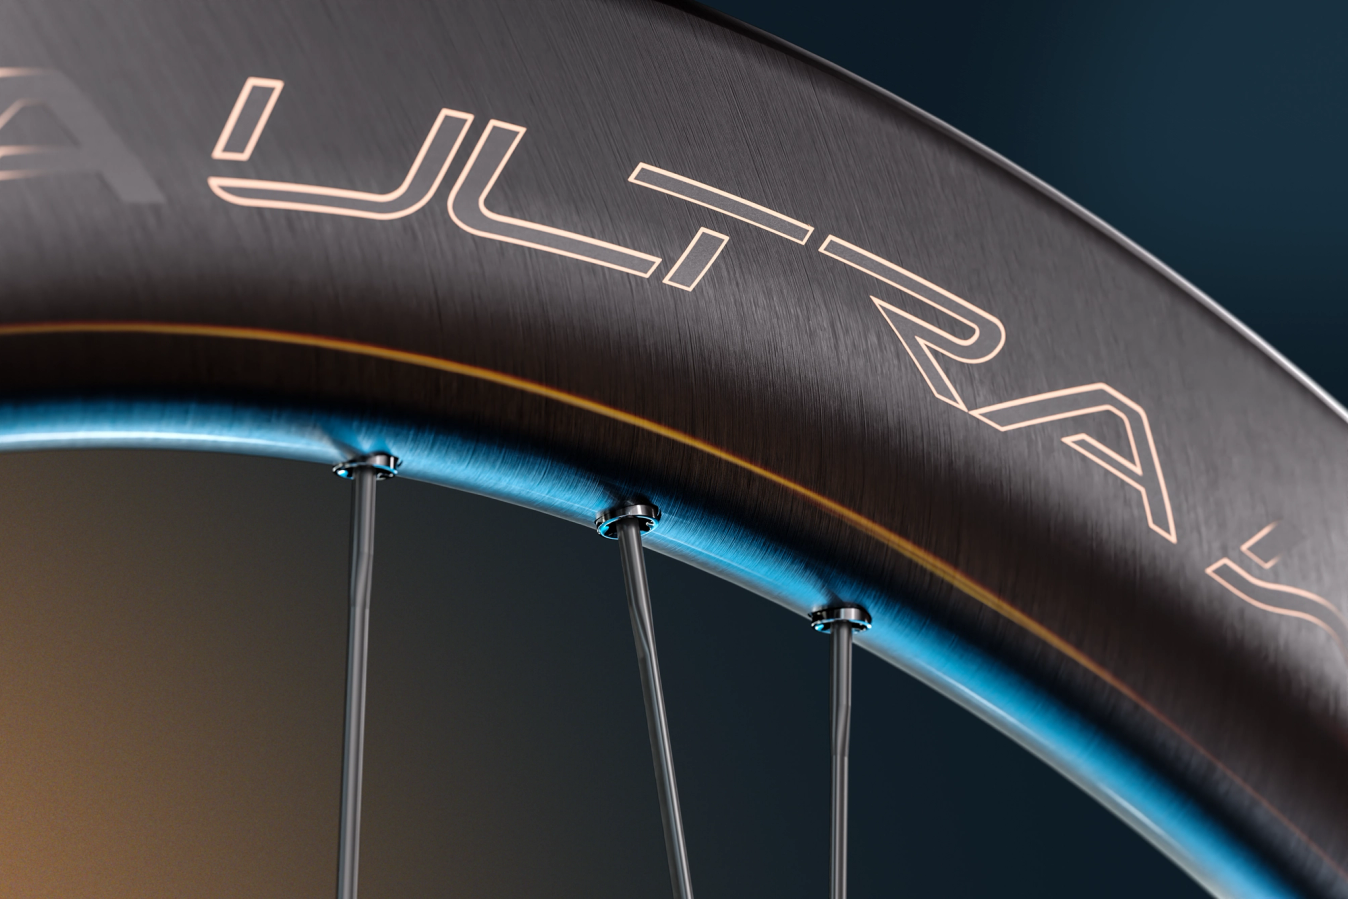 Campagnolo has changed the way the spokes integrate into the rim